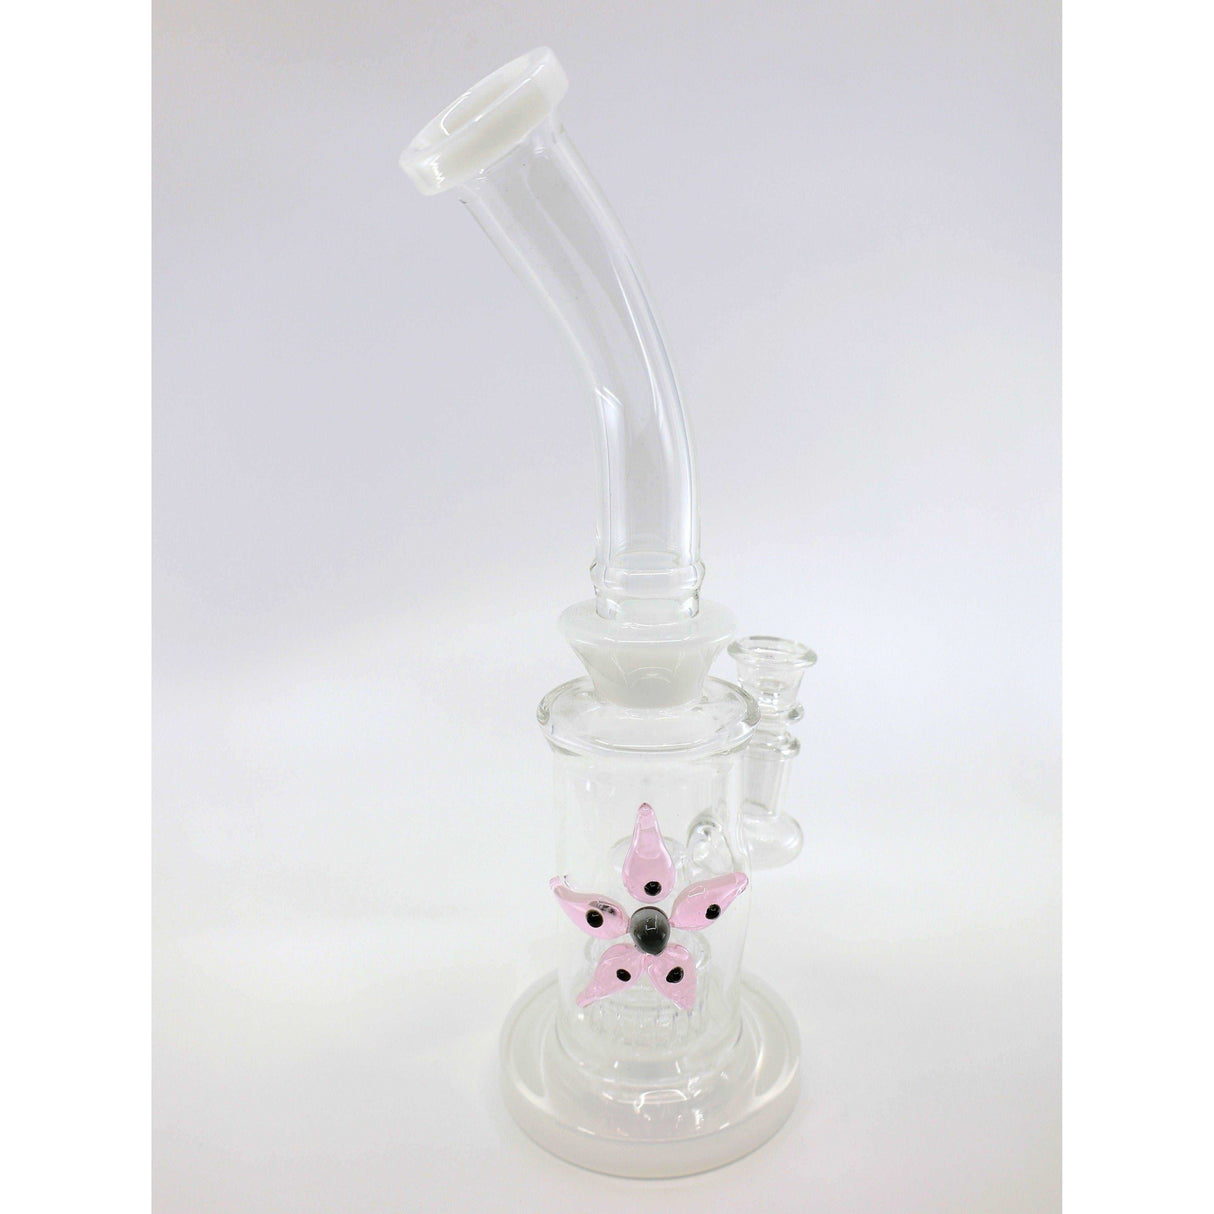 Dab Rig | SK - 184 10 " Sower Head with Glass ART Work